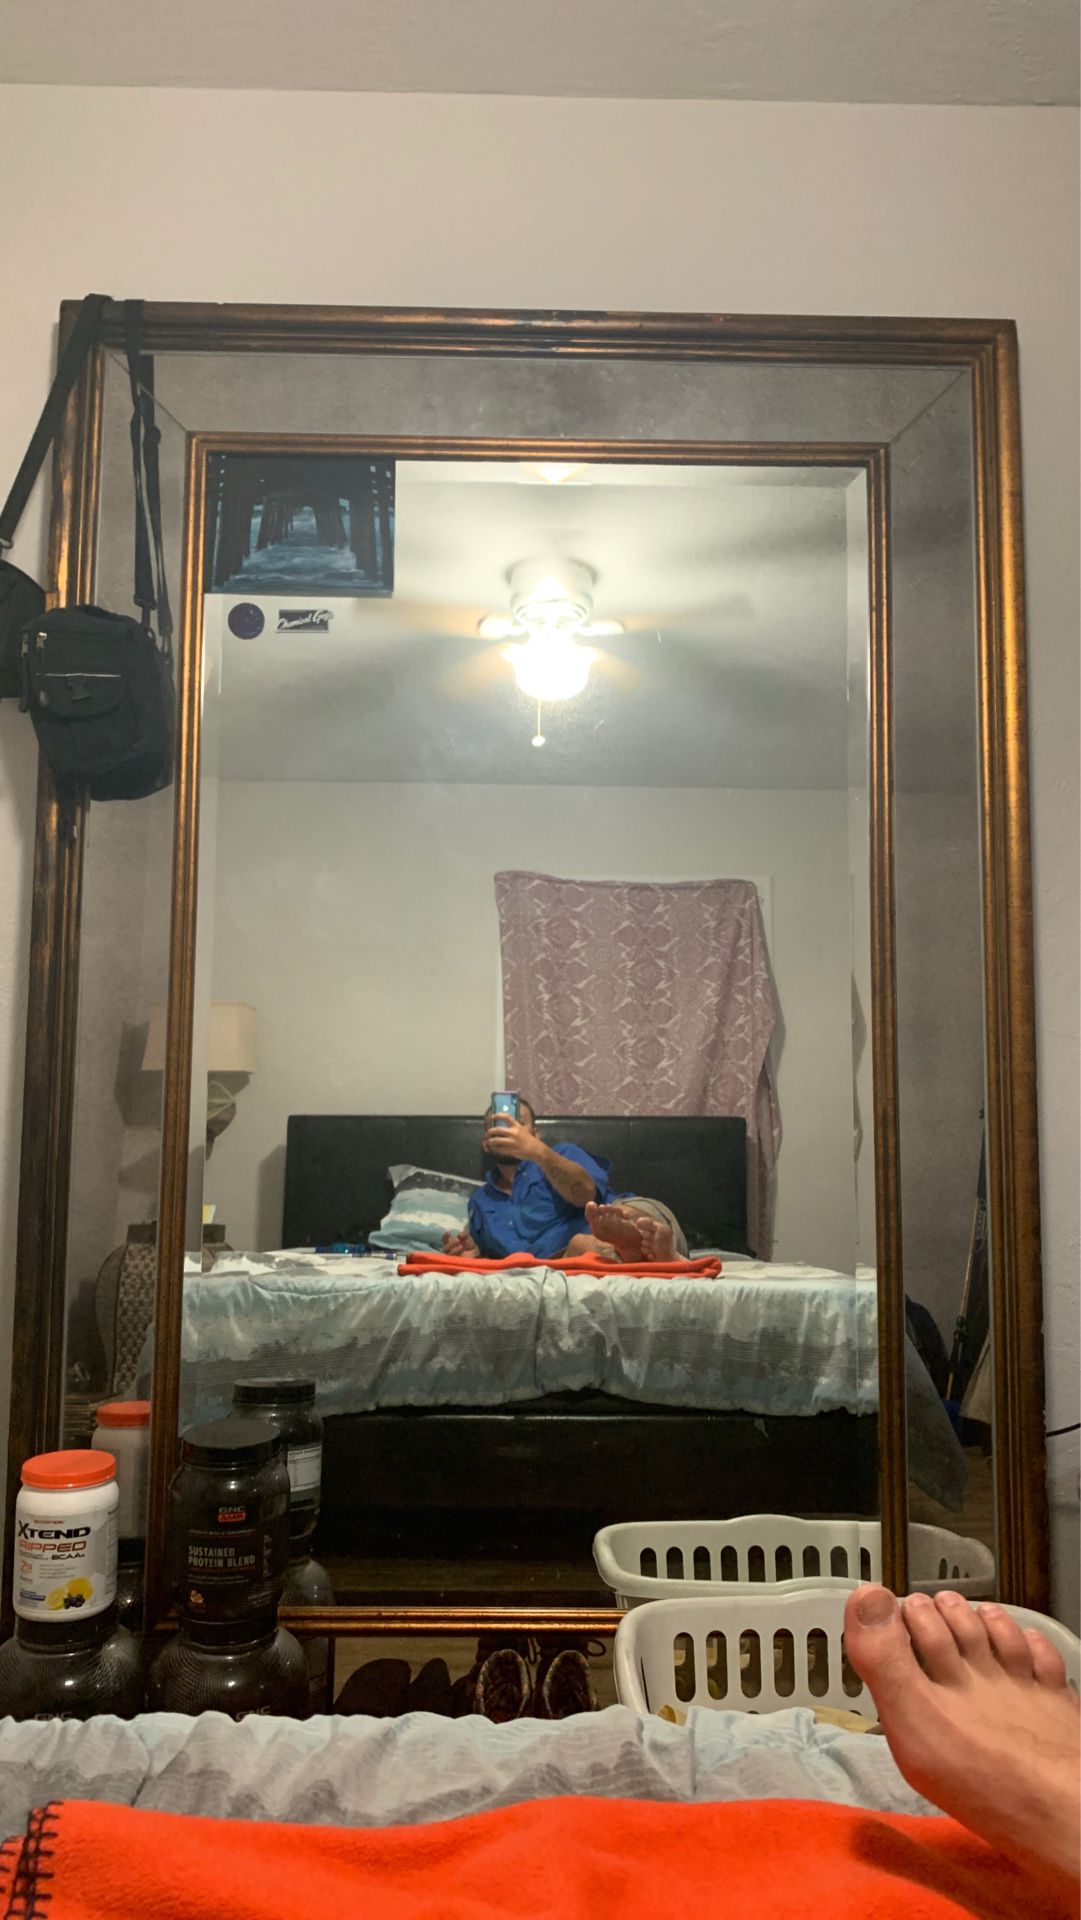 Giant Mirror (beautiful!) hit me with offer